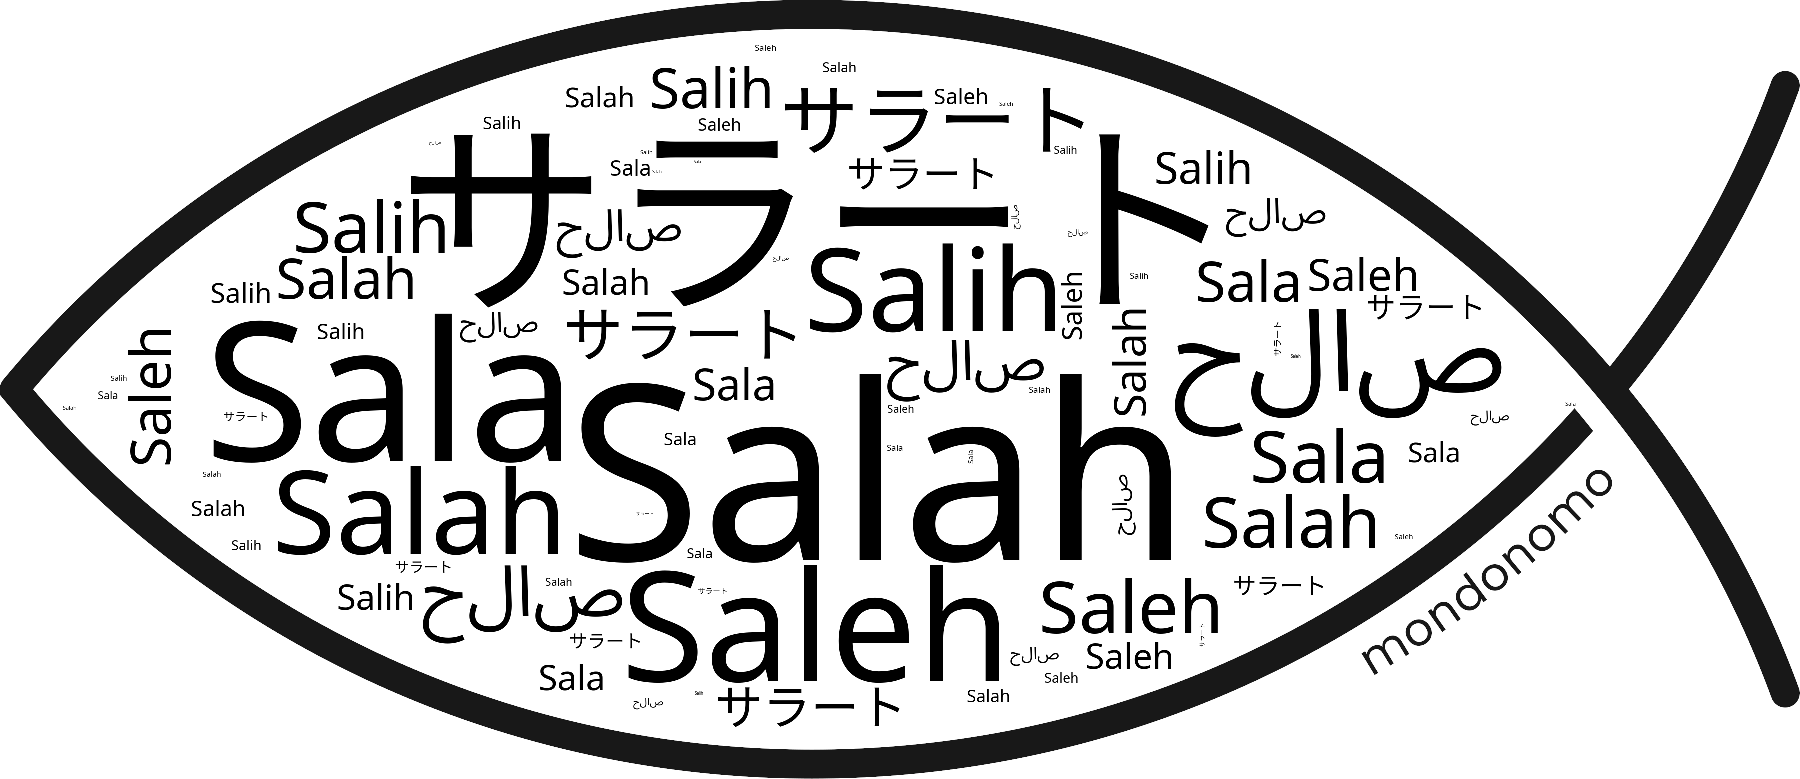 Name Salah in the world's Bibles